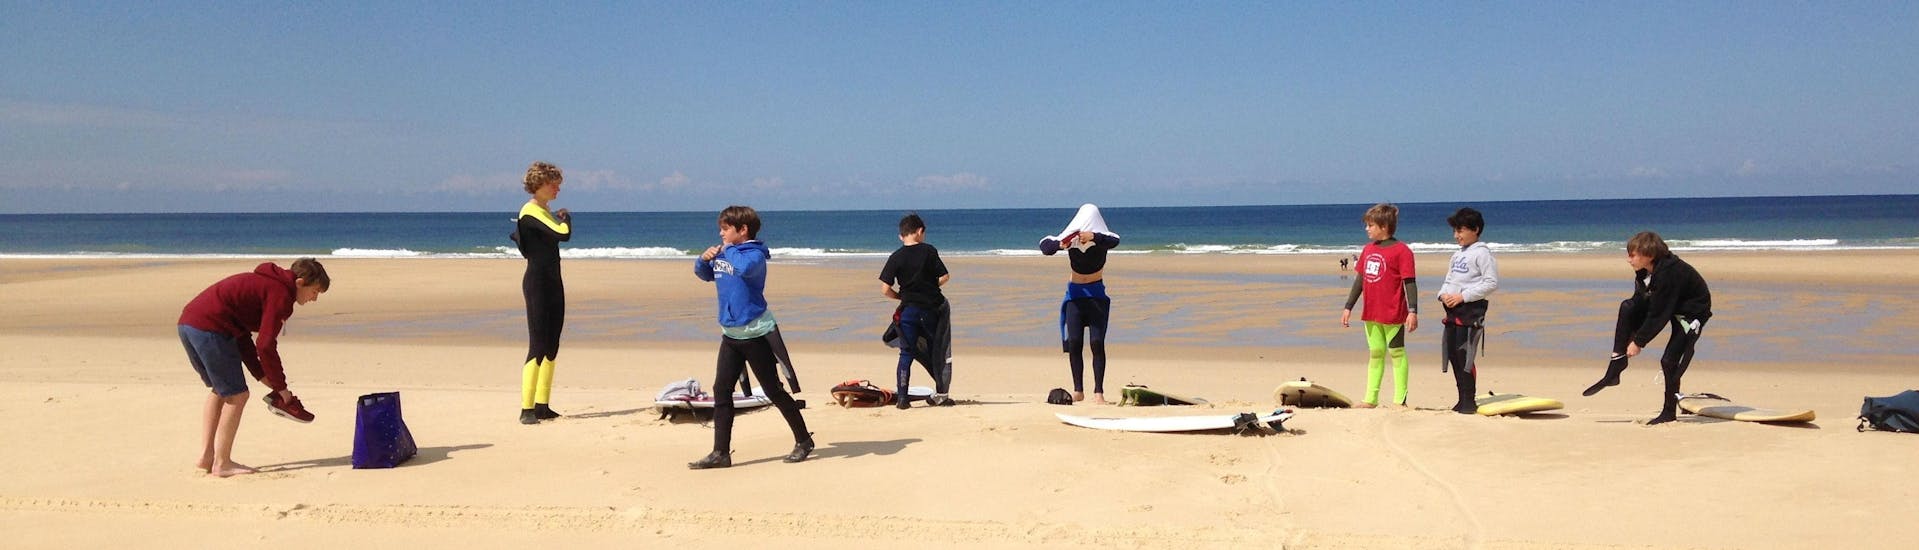 children are having surfing lessons on the sail fish beach in Cap-Ferret with Nomad surf school.